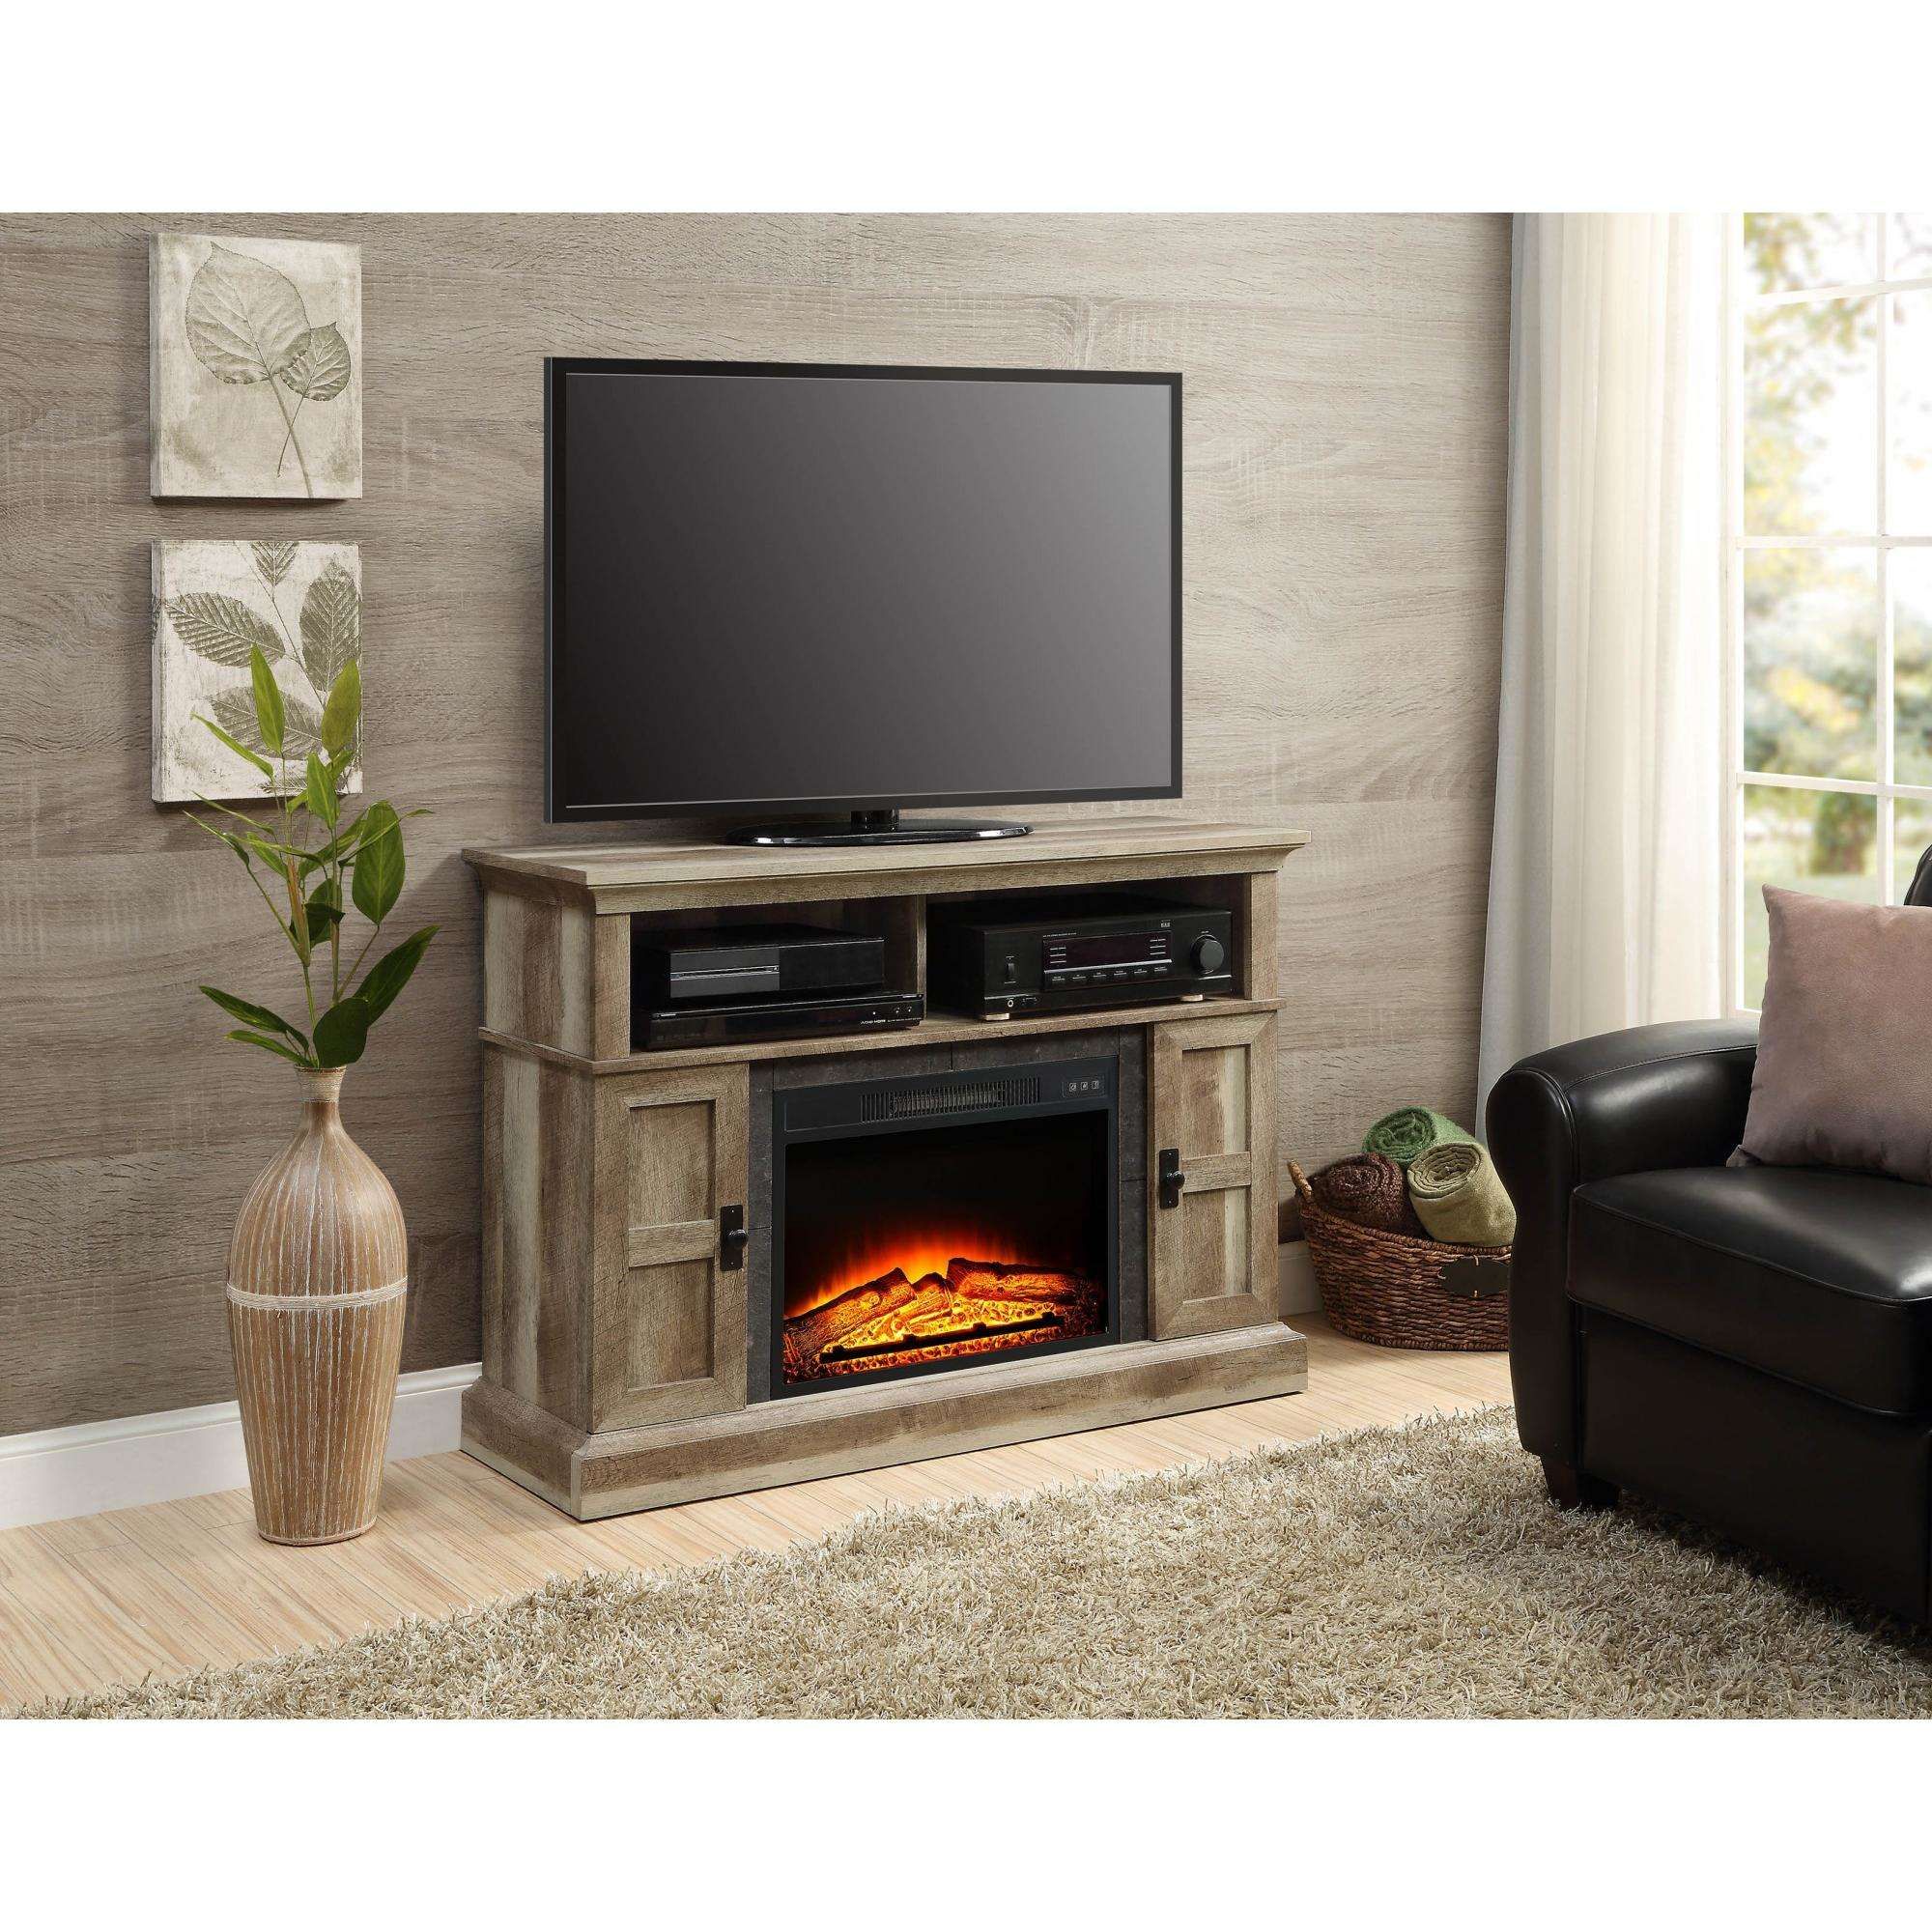 55 Inch Tv Stand with Fireplace Best Of Whalen Media Fireplace for Your Home Television Stand Fits